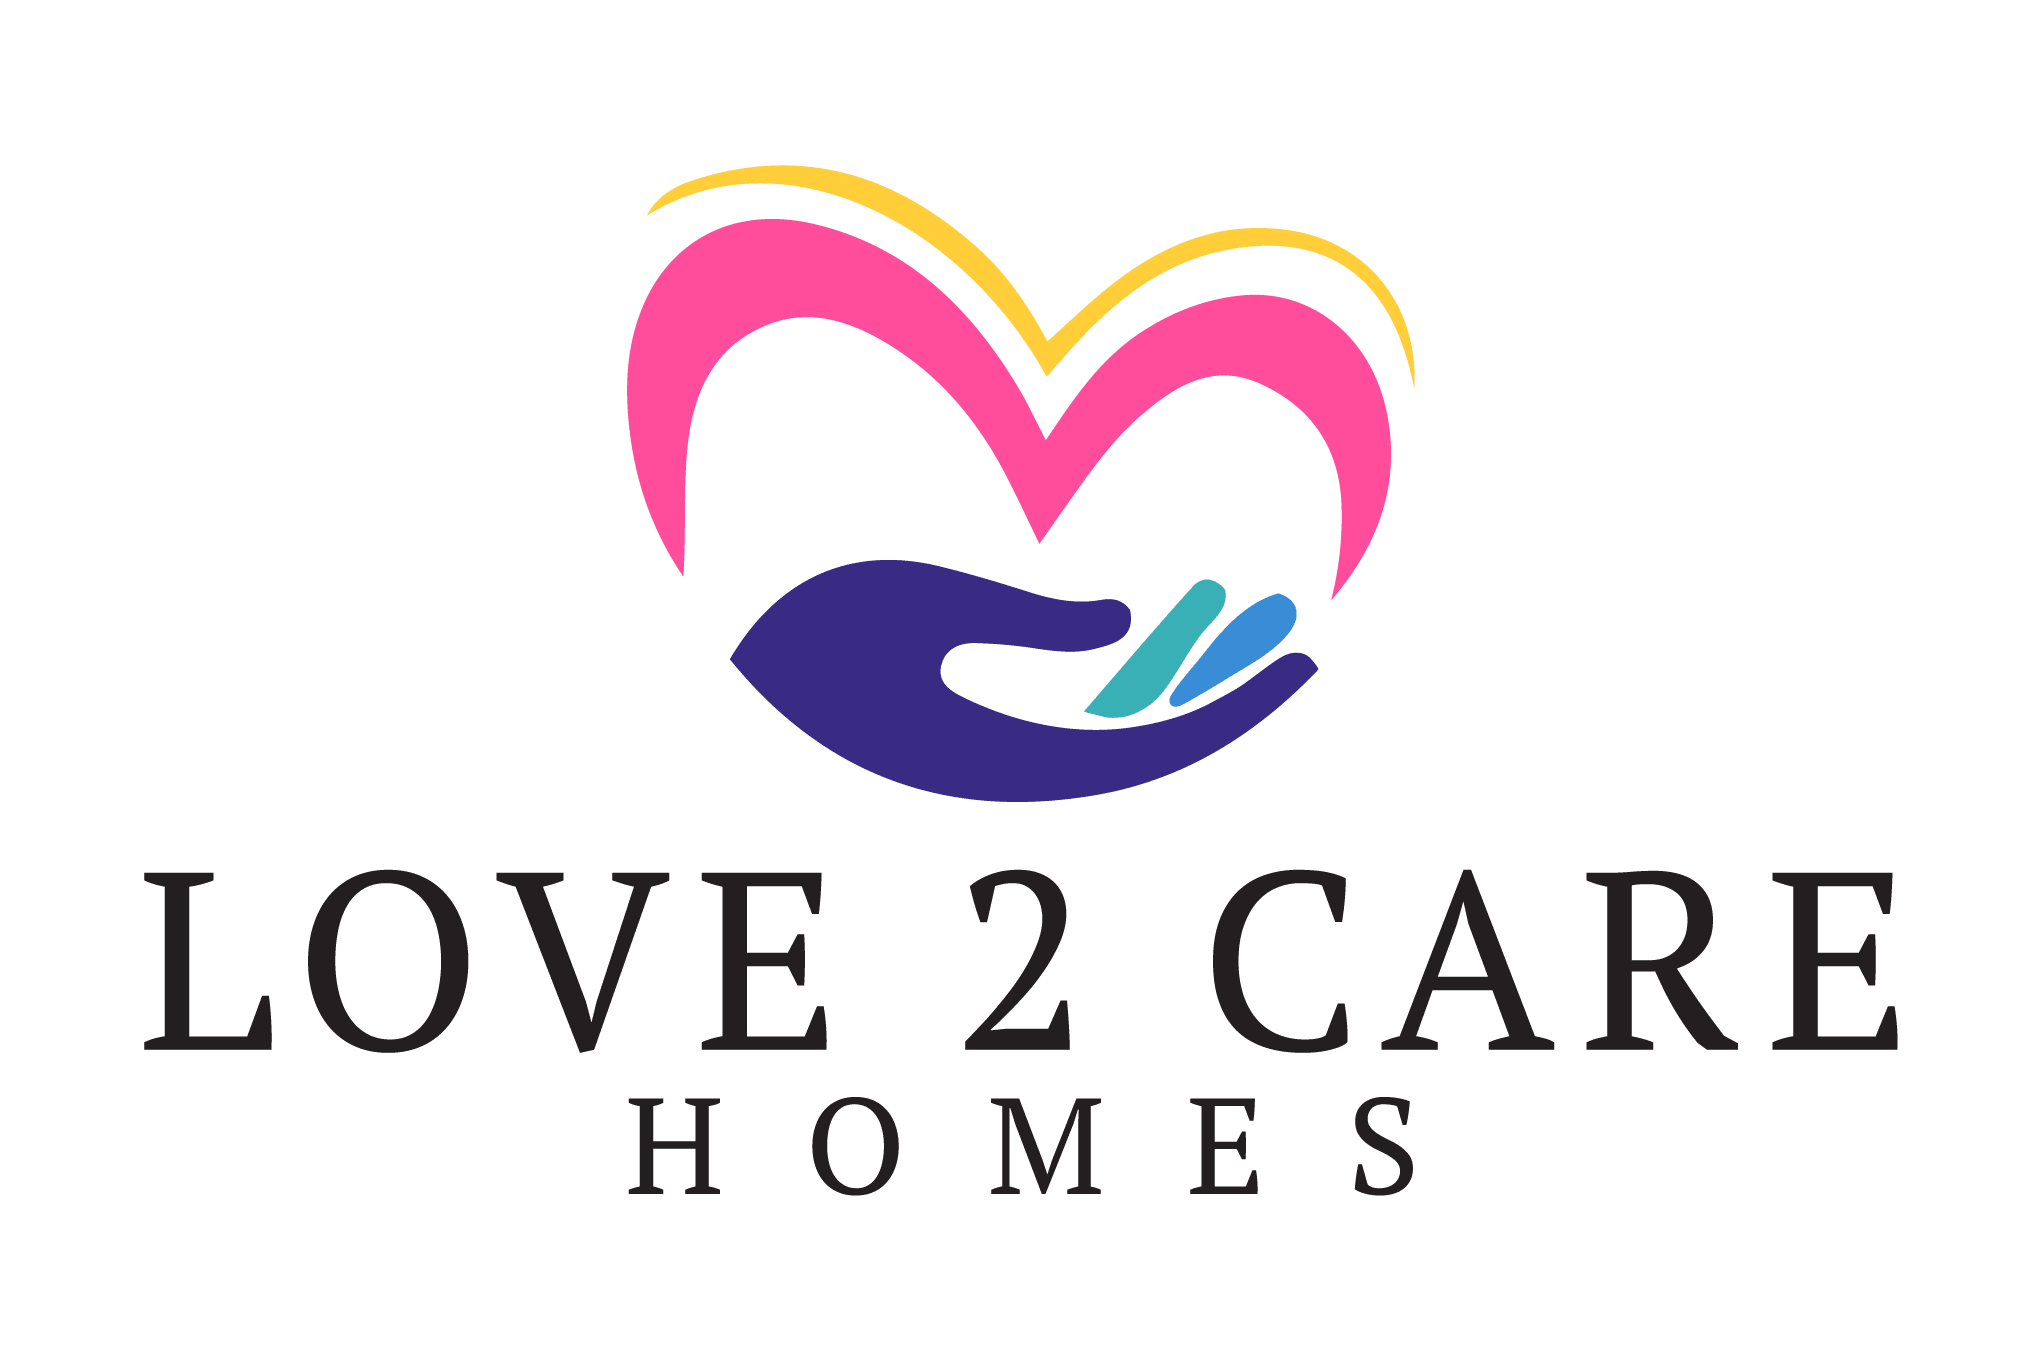 Photo of Love 2 Care Homes